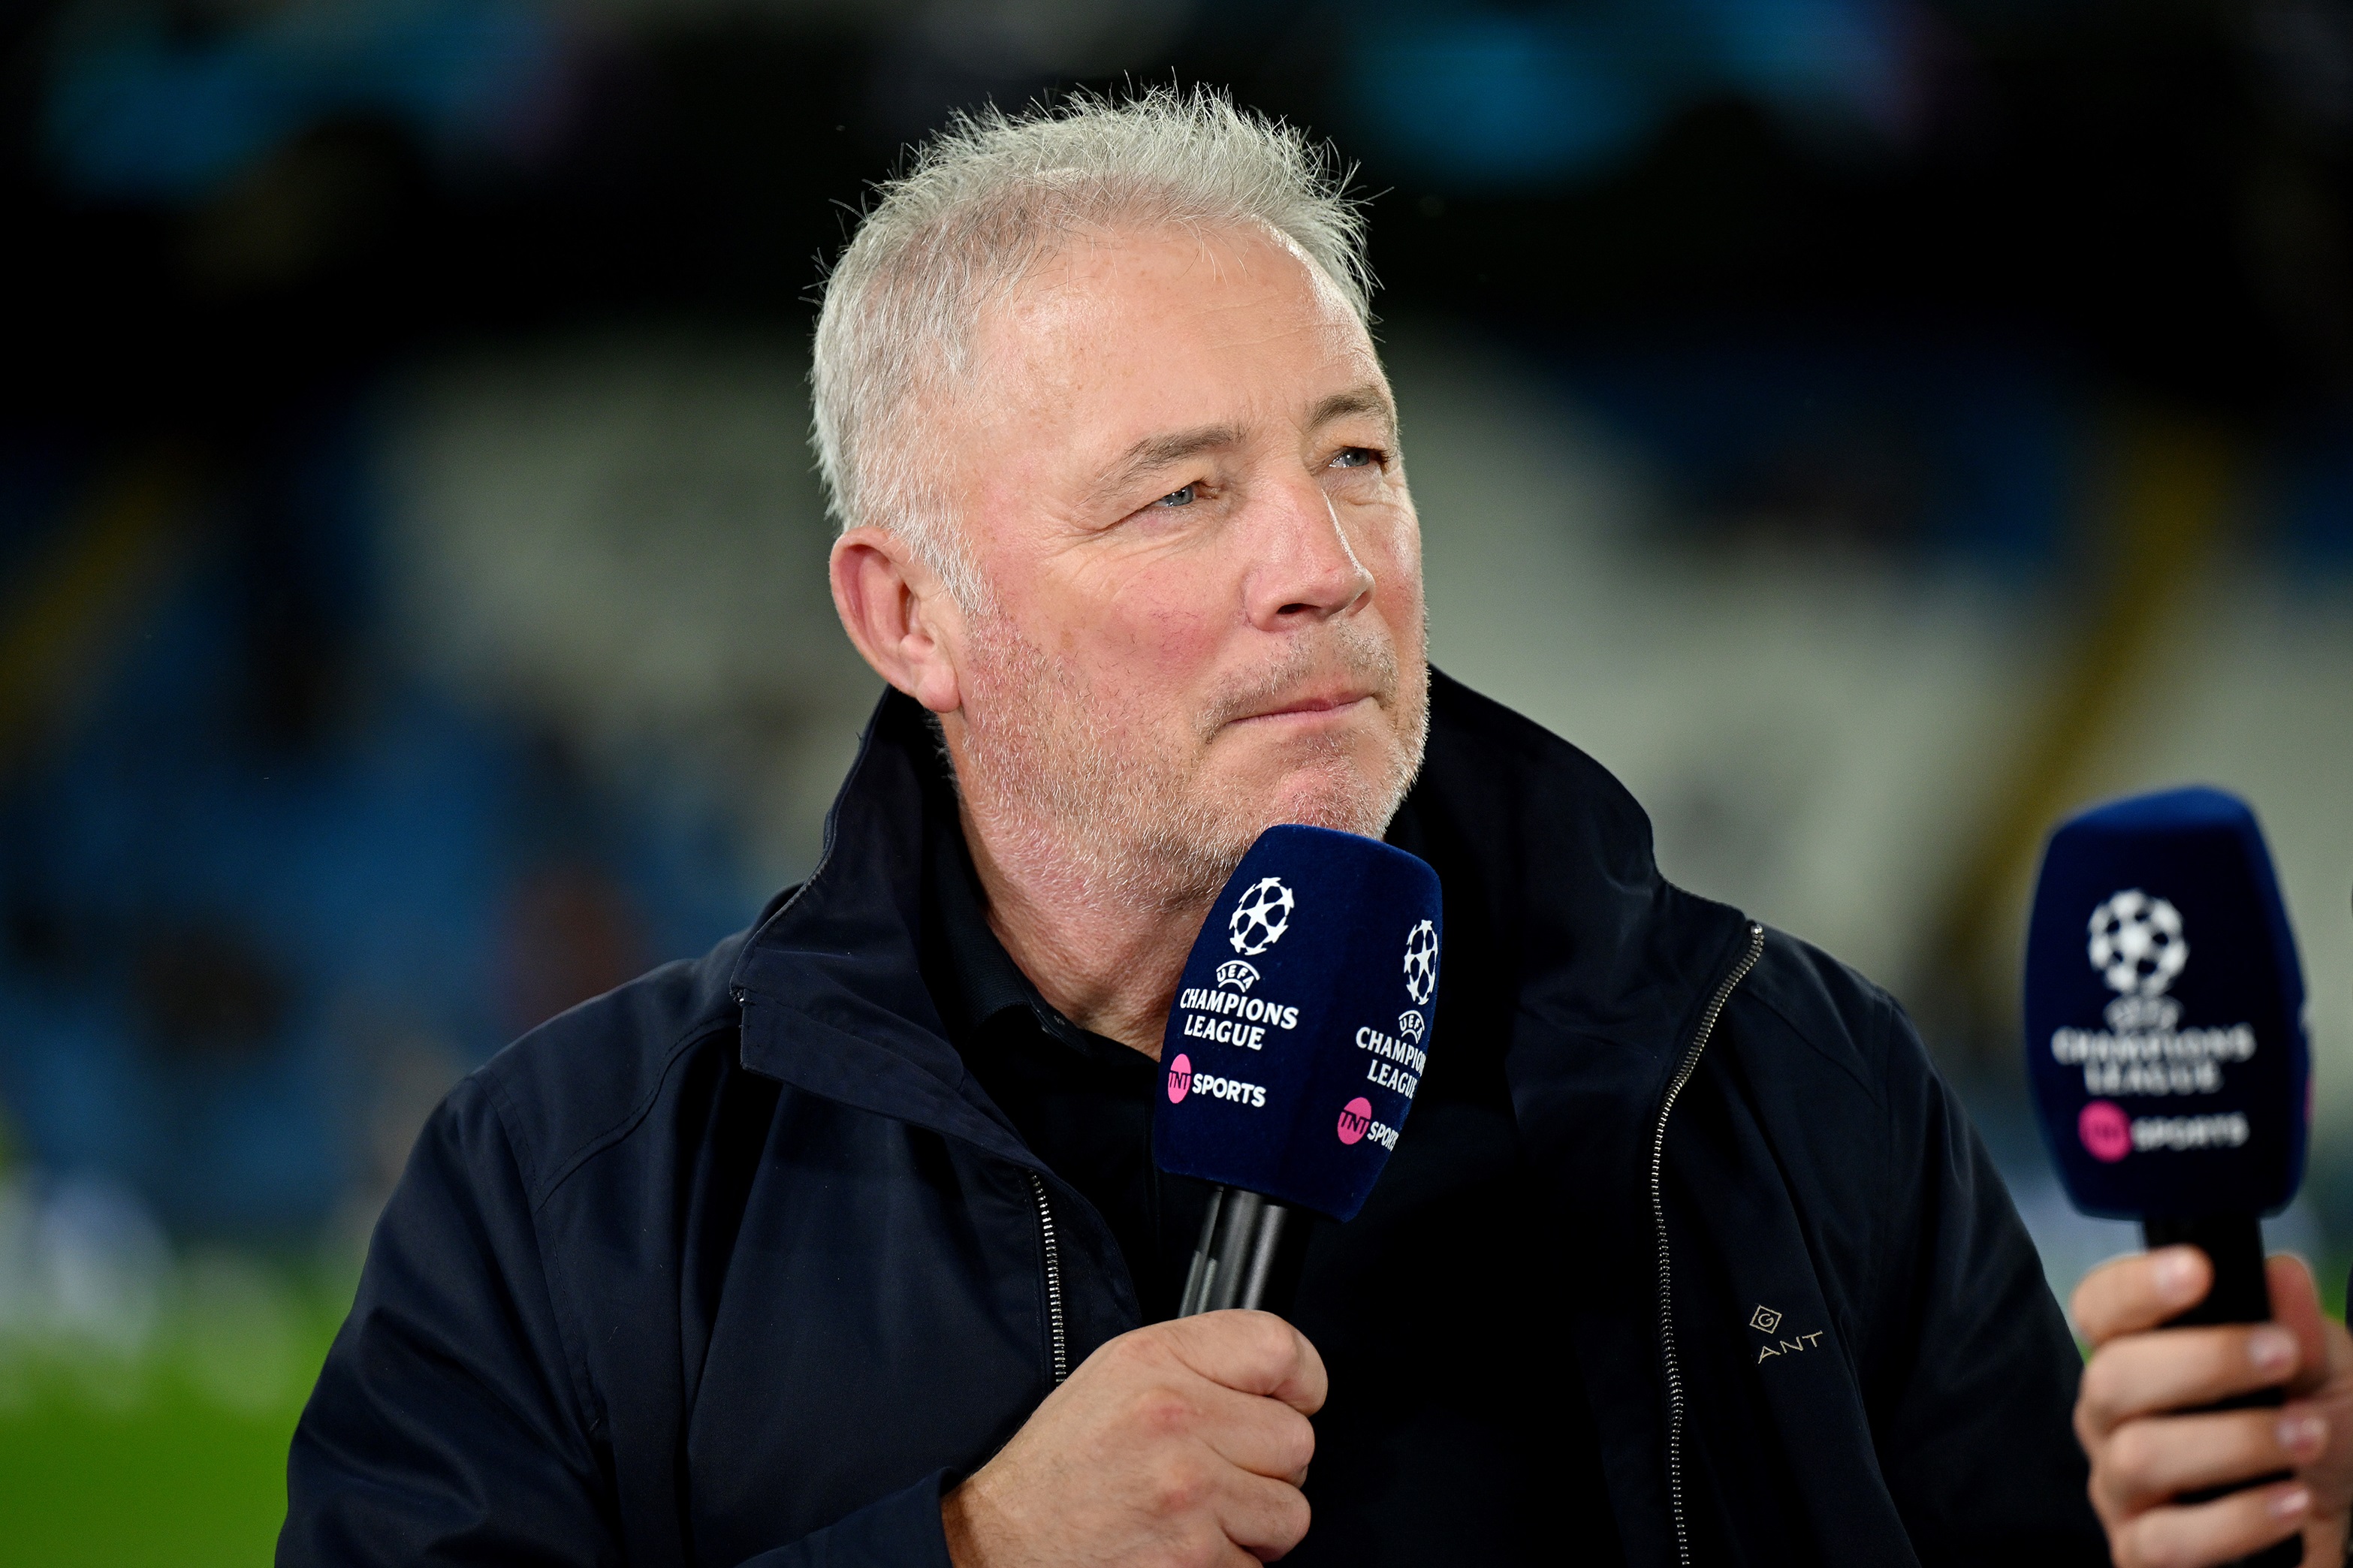 Ally McCoist admits he completely underestimated ‘brilliant’ Liverpool player